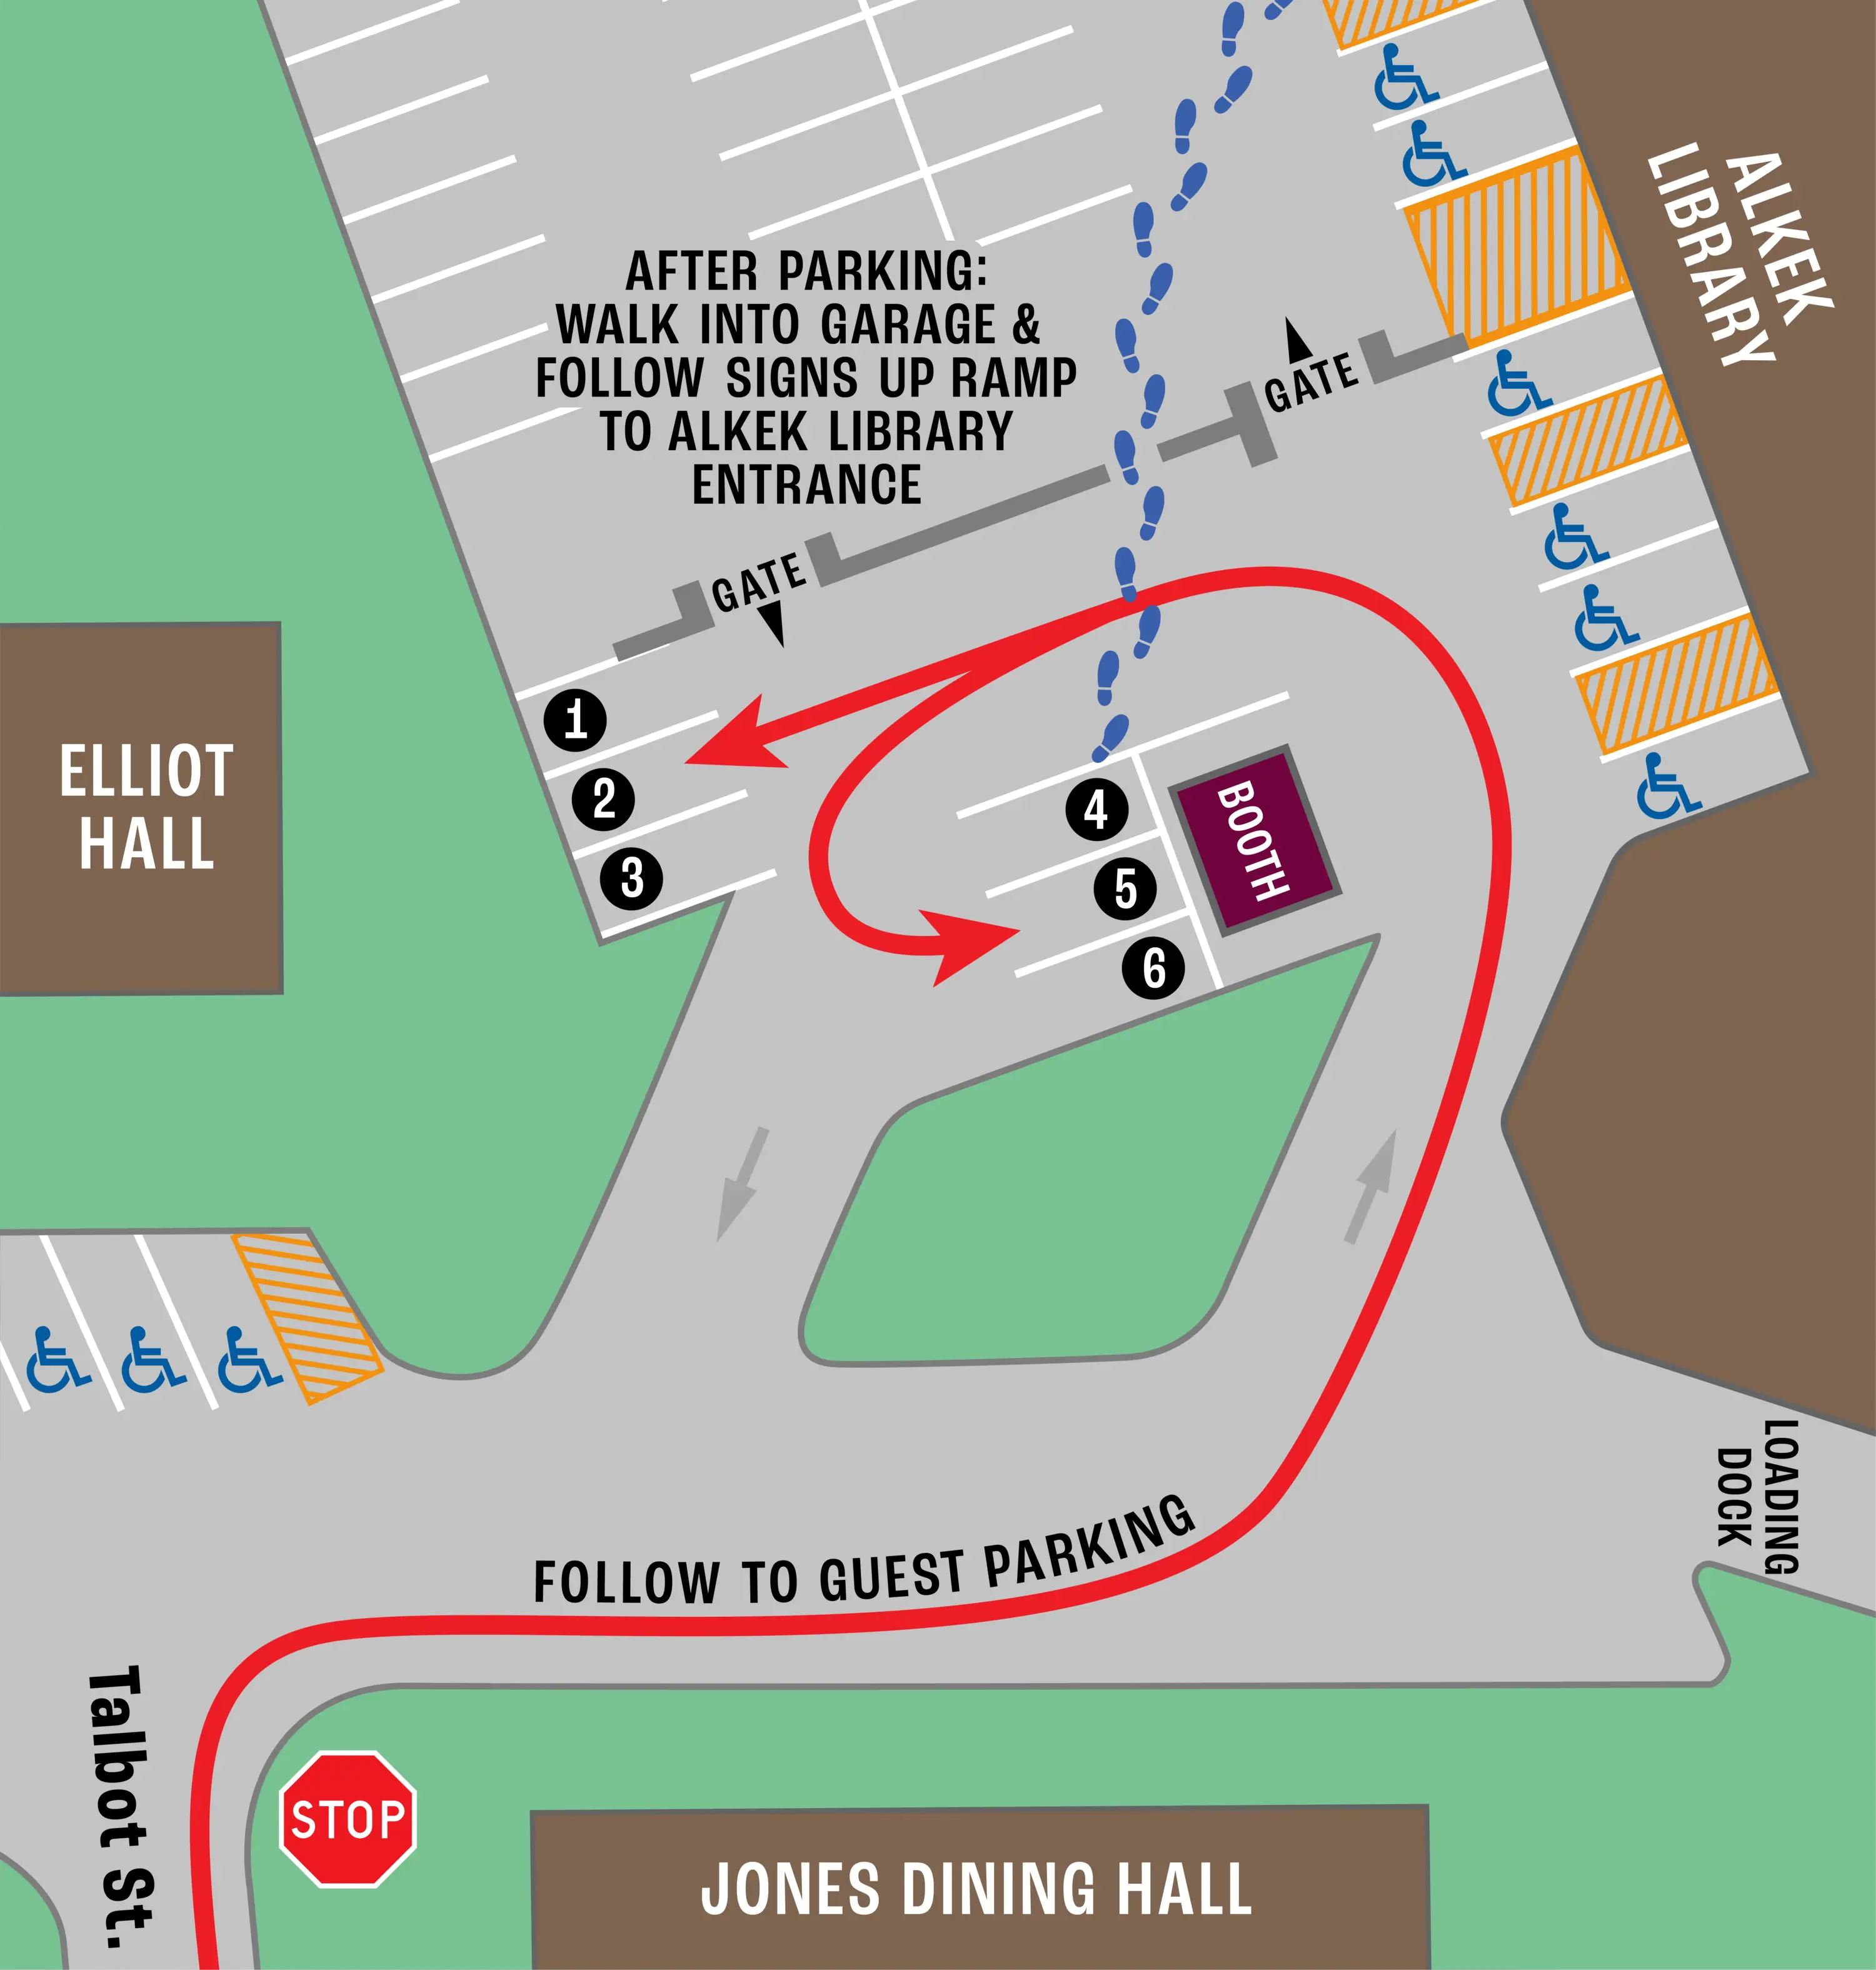 image of a map showing six visitor parking spaces outside of the Alkek Parking Garage